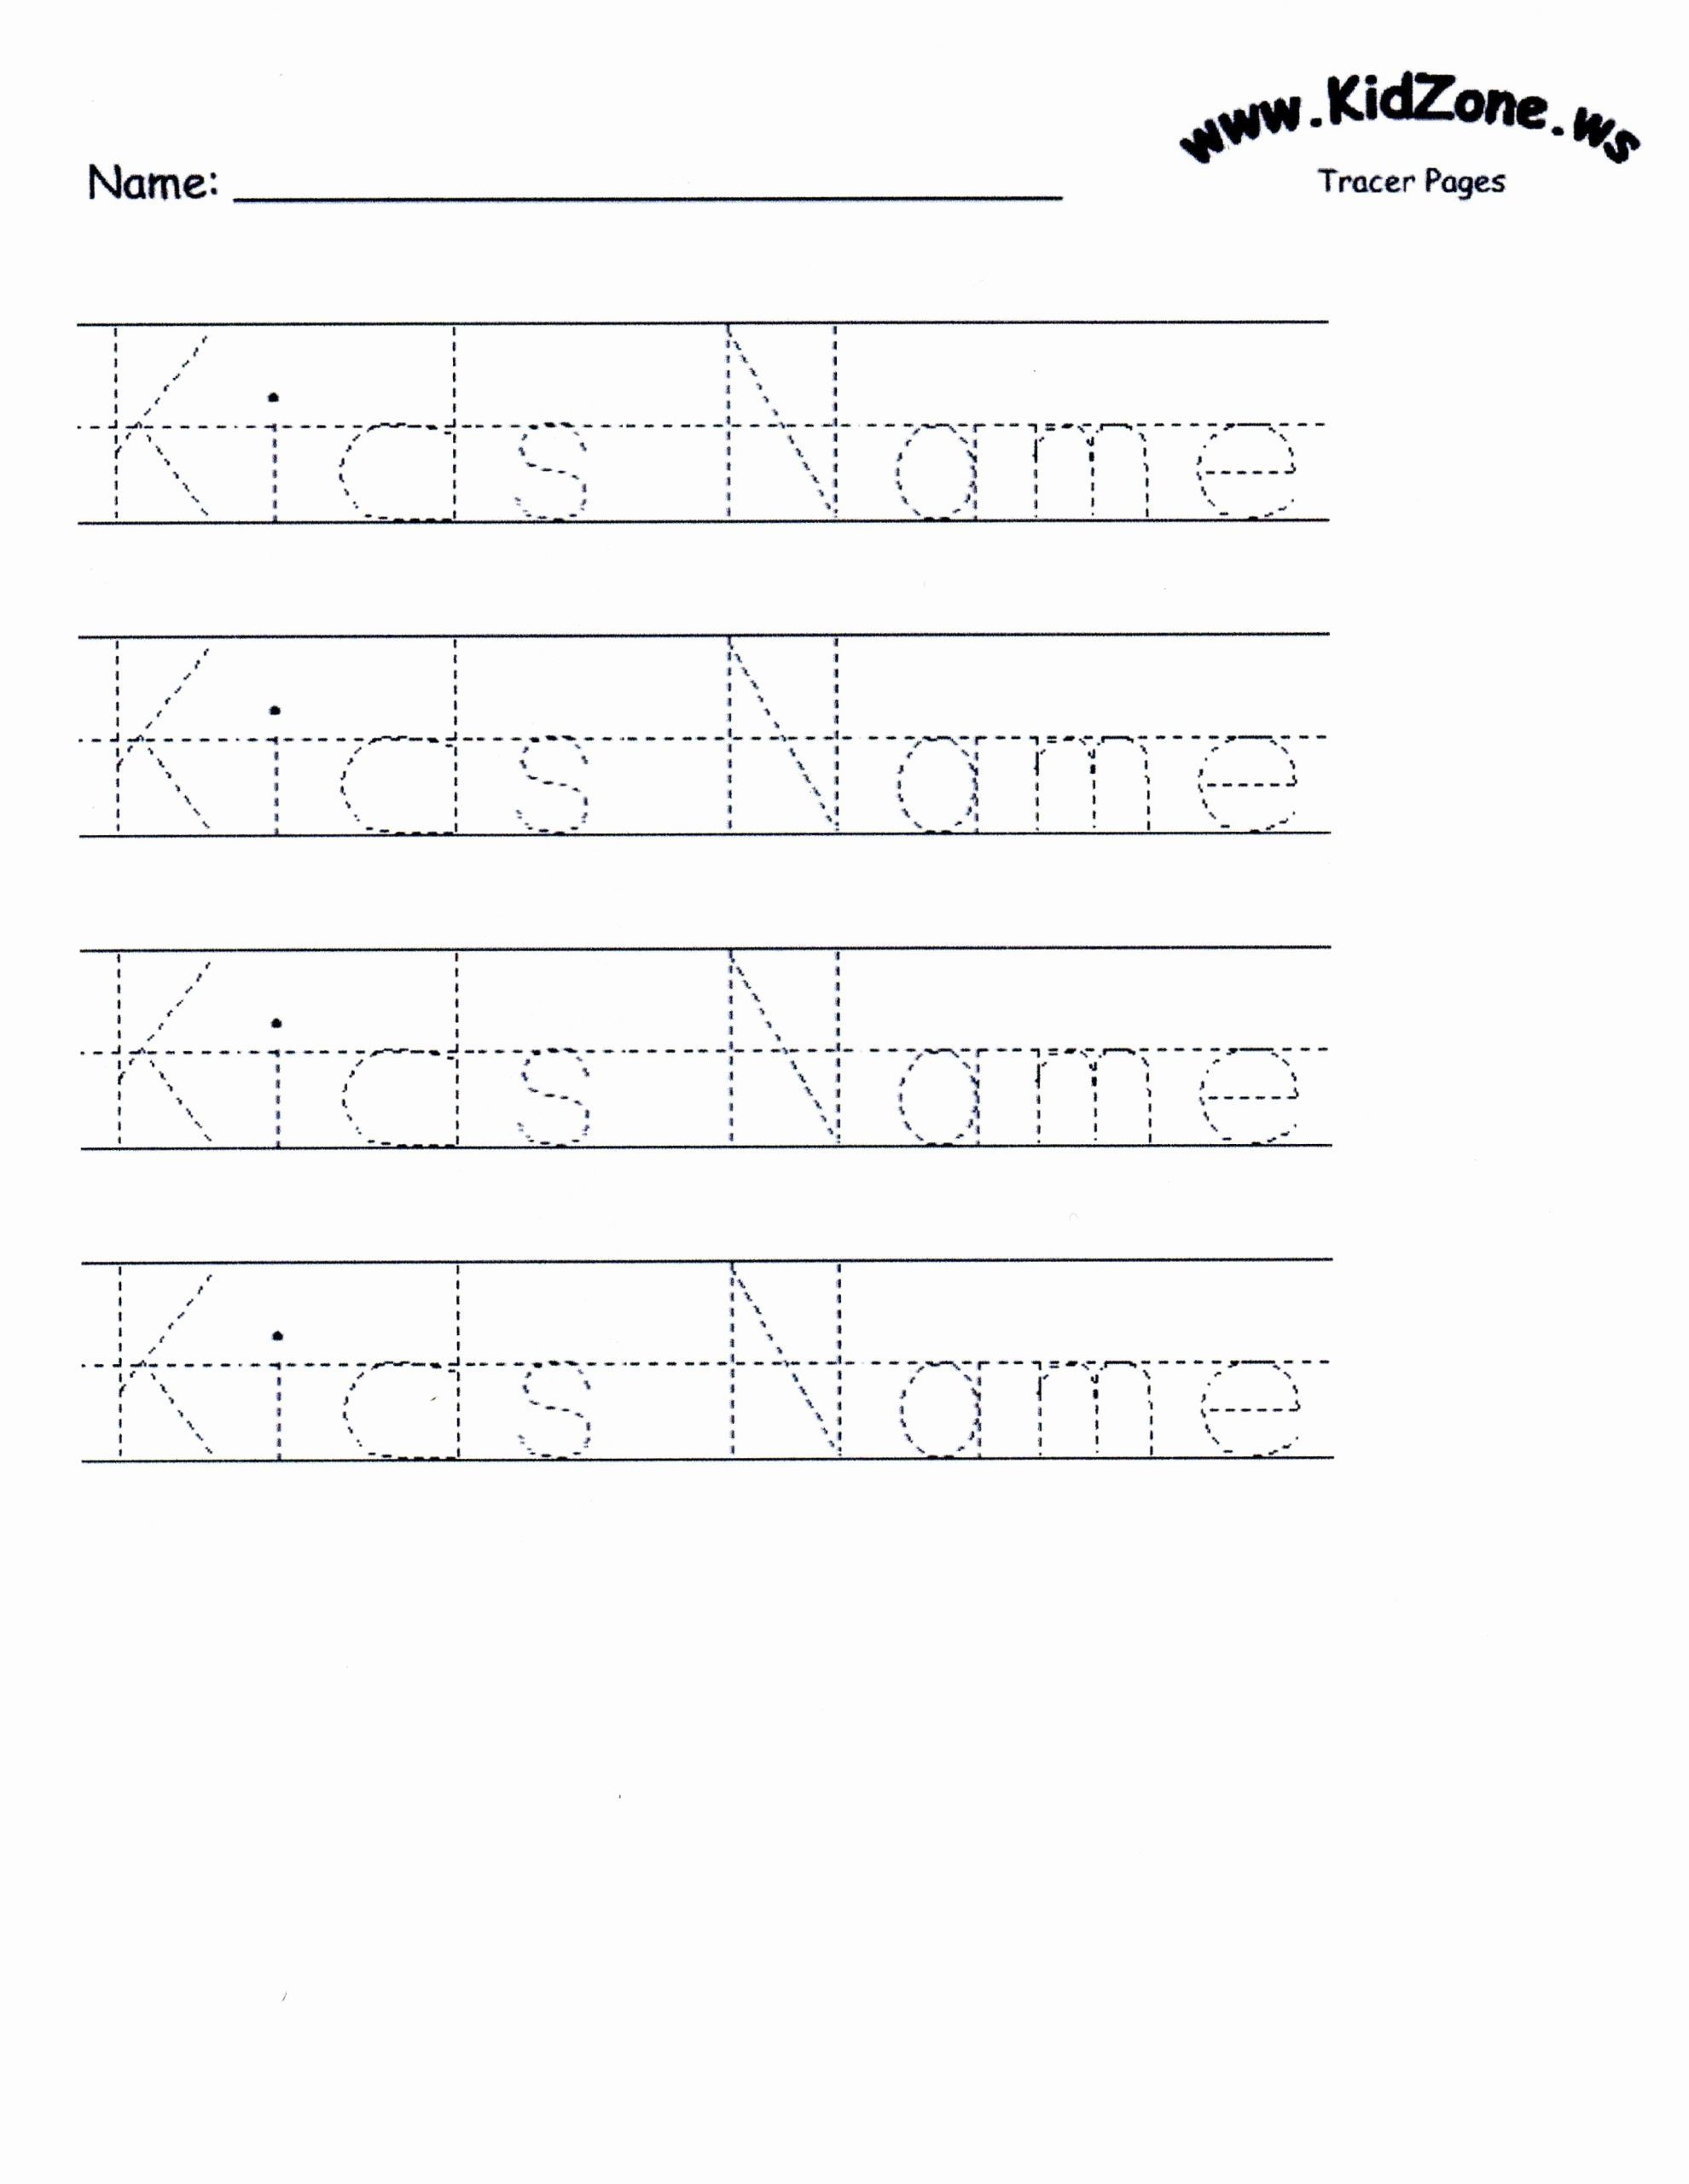 Traceable Name Worksheets For Preschoolers In 2020 | Tracing